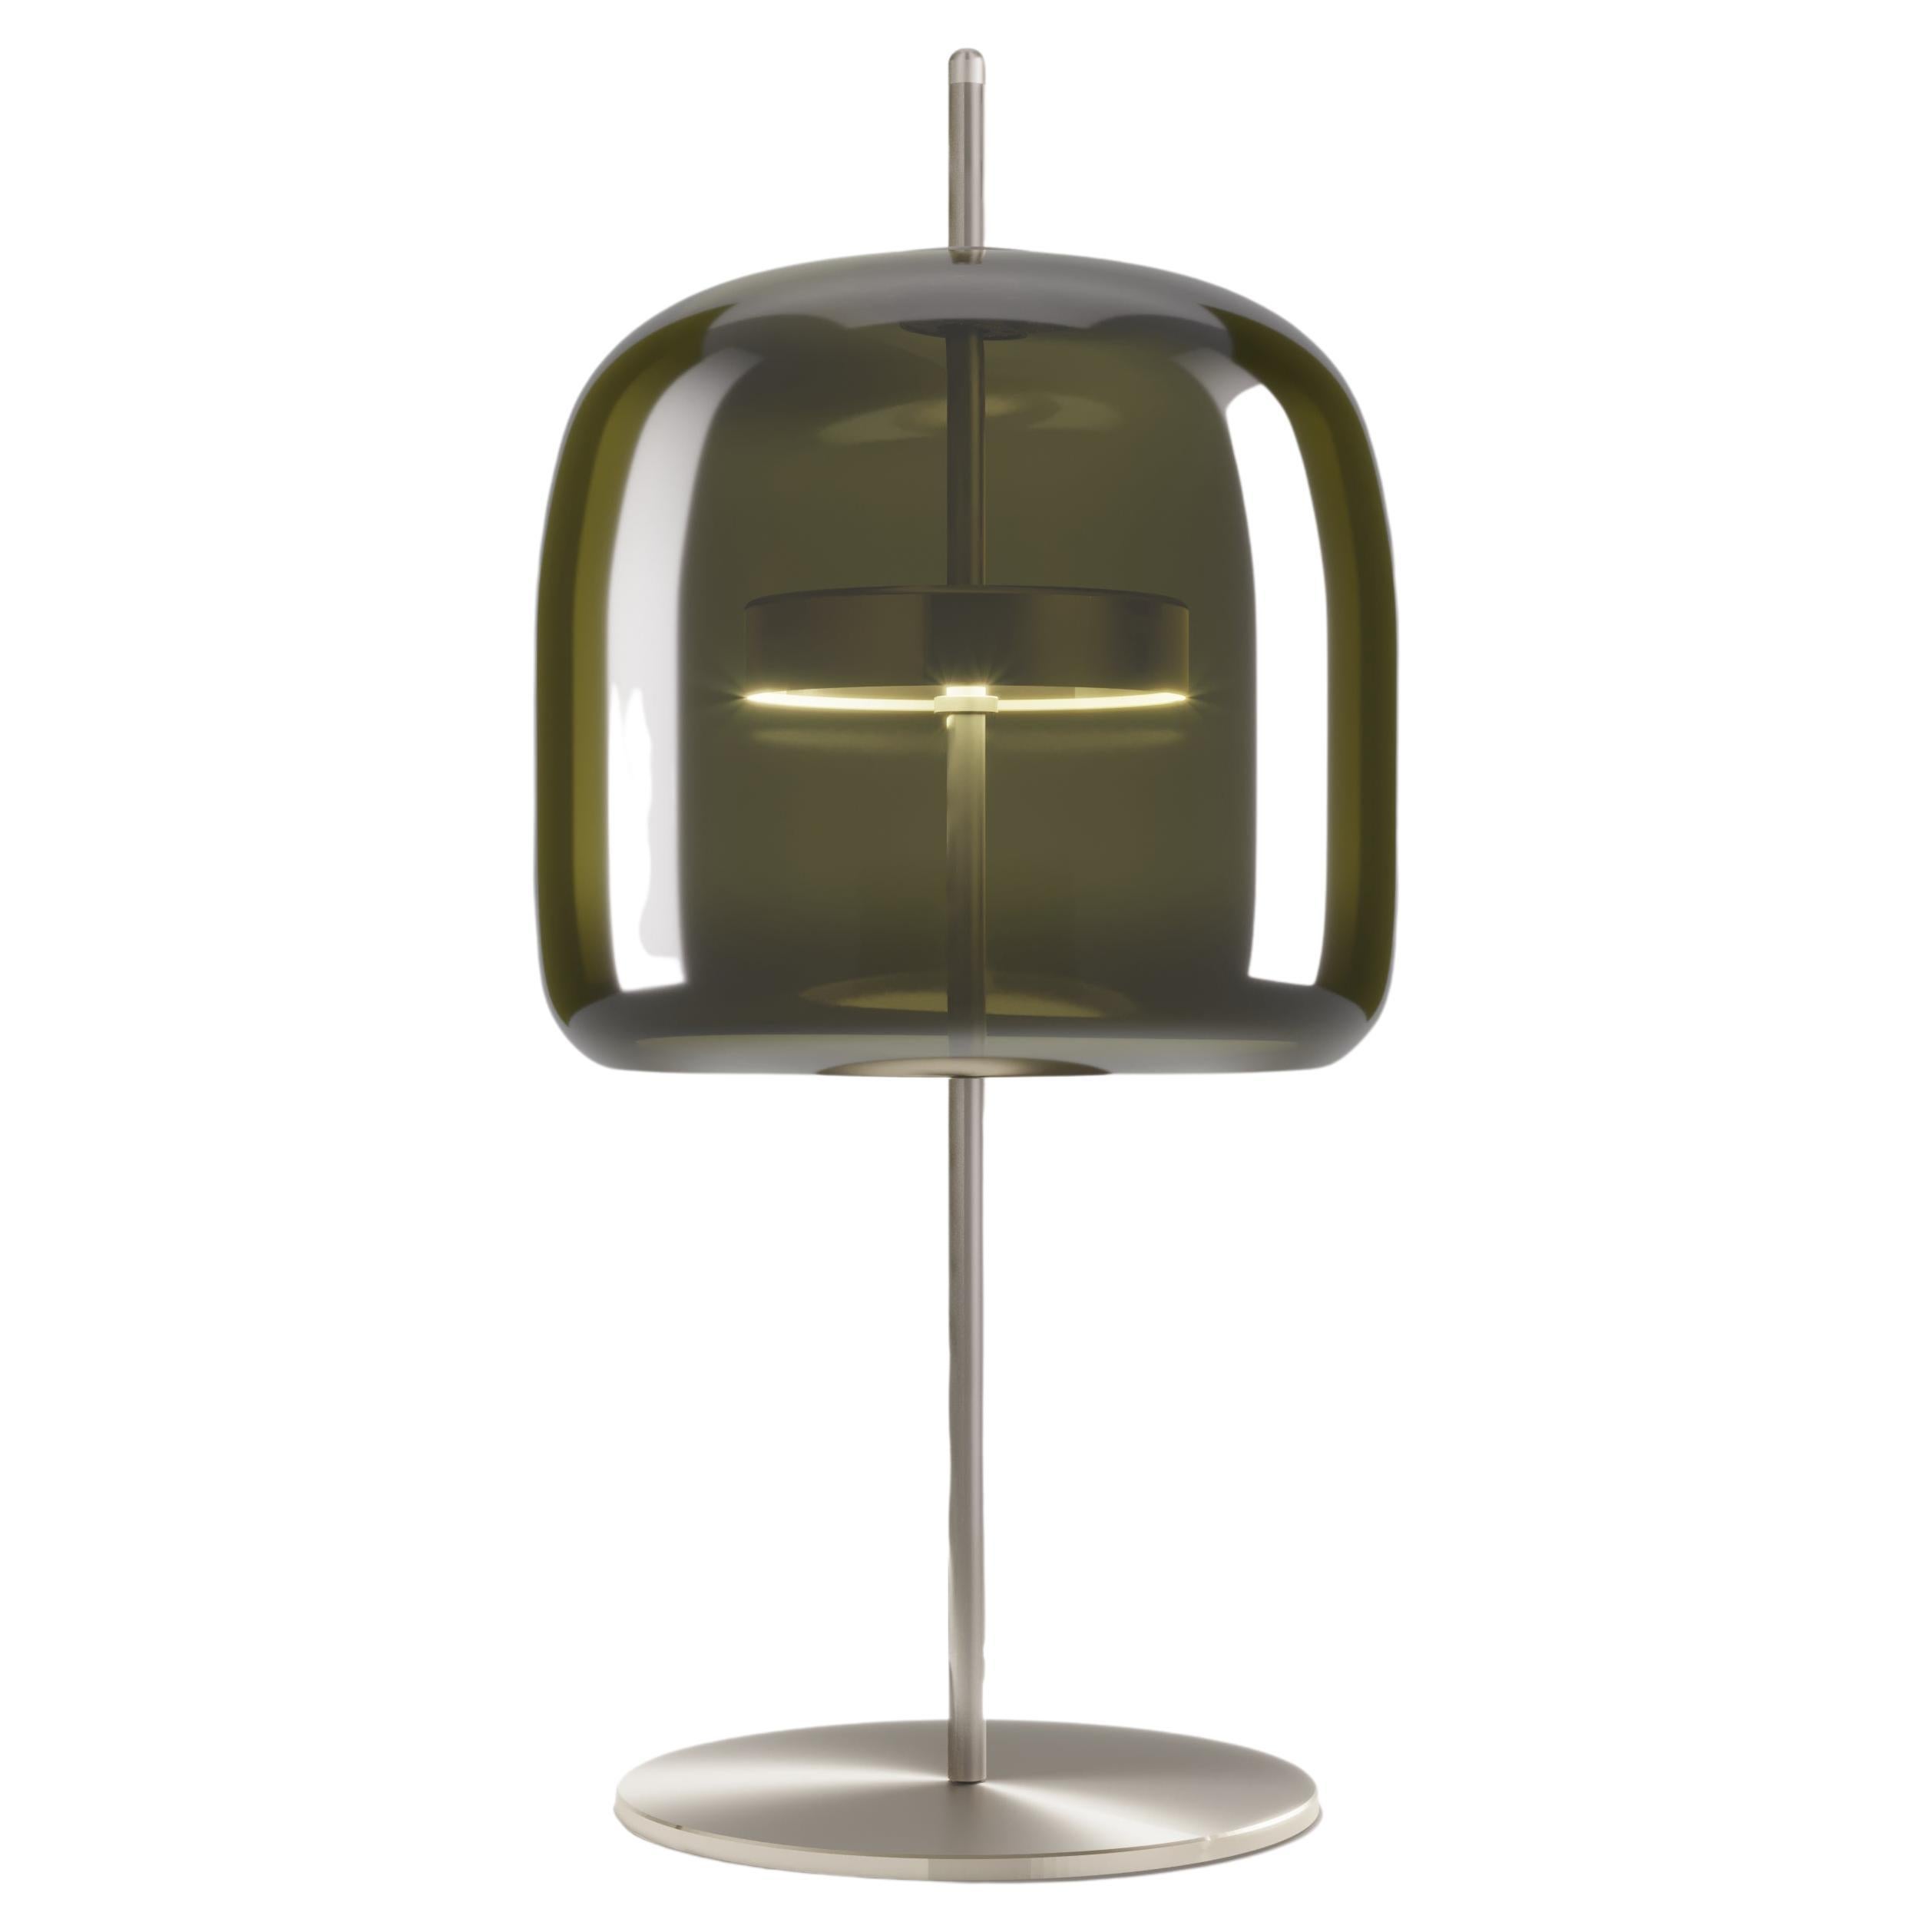 Vistosi Jube Table Lamp in Old Green Transparent Glass And Matt Steel Finish For Sale